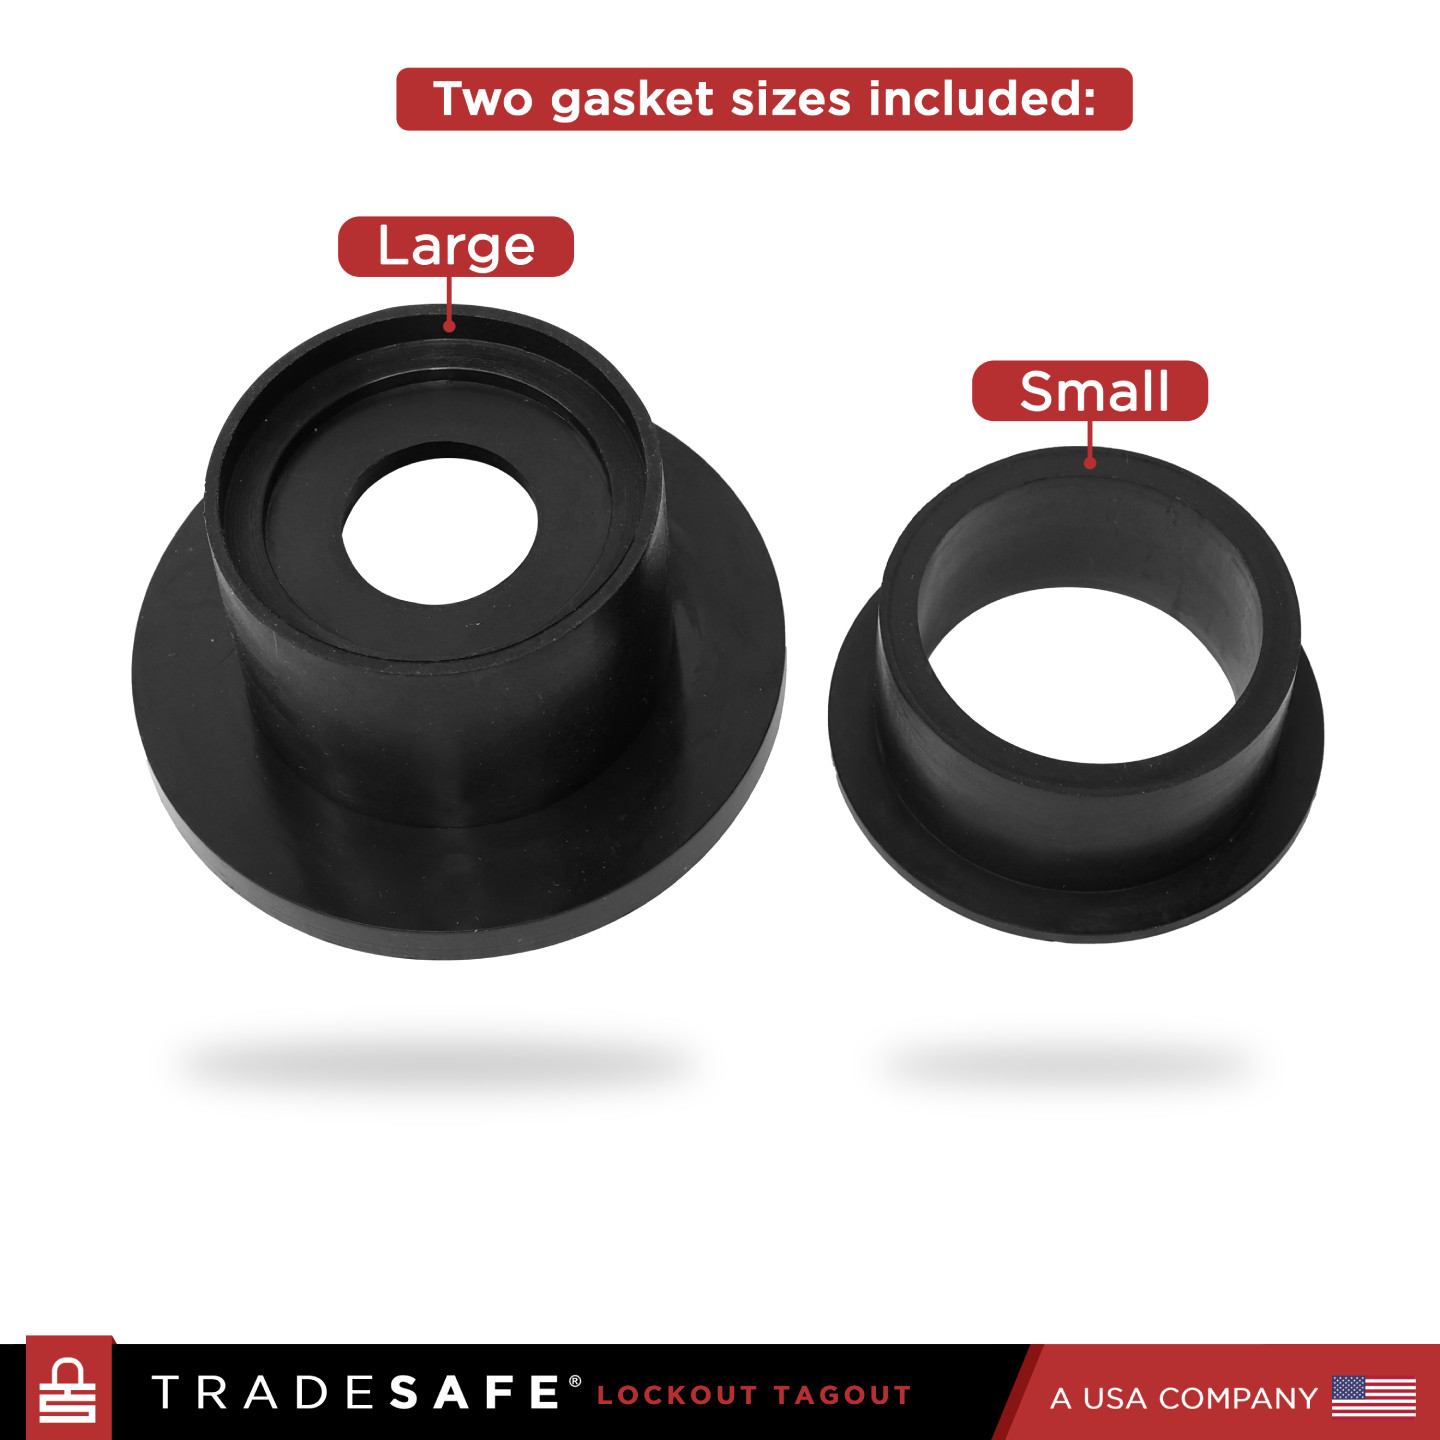 size comparison of large and small gasket